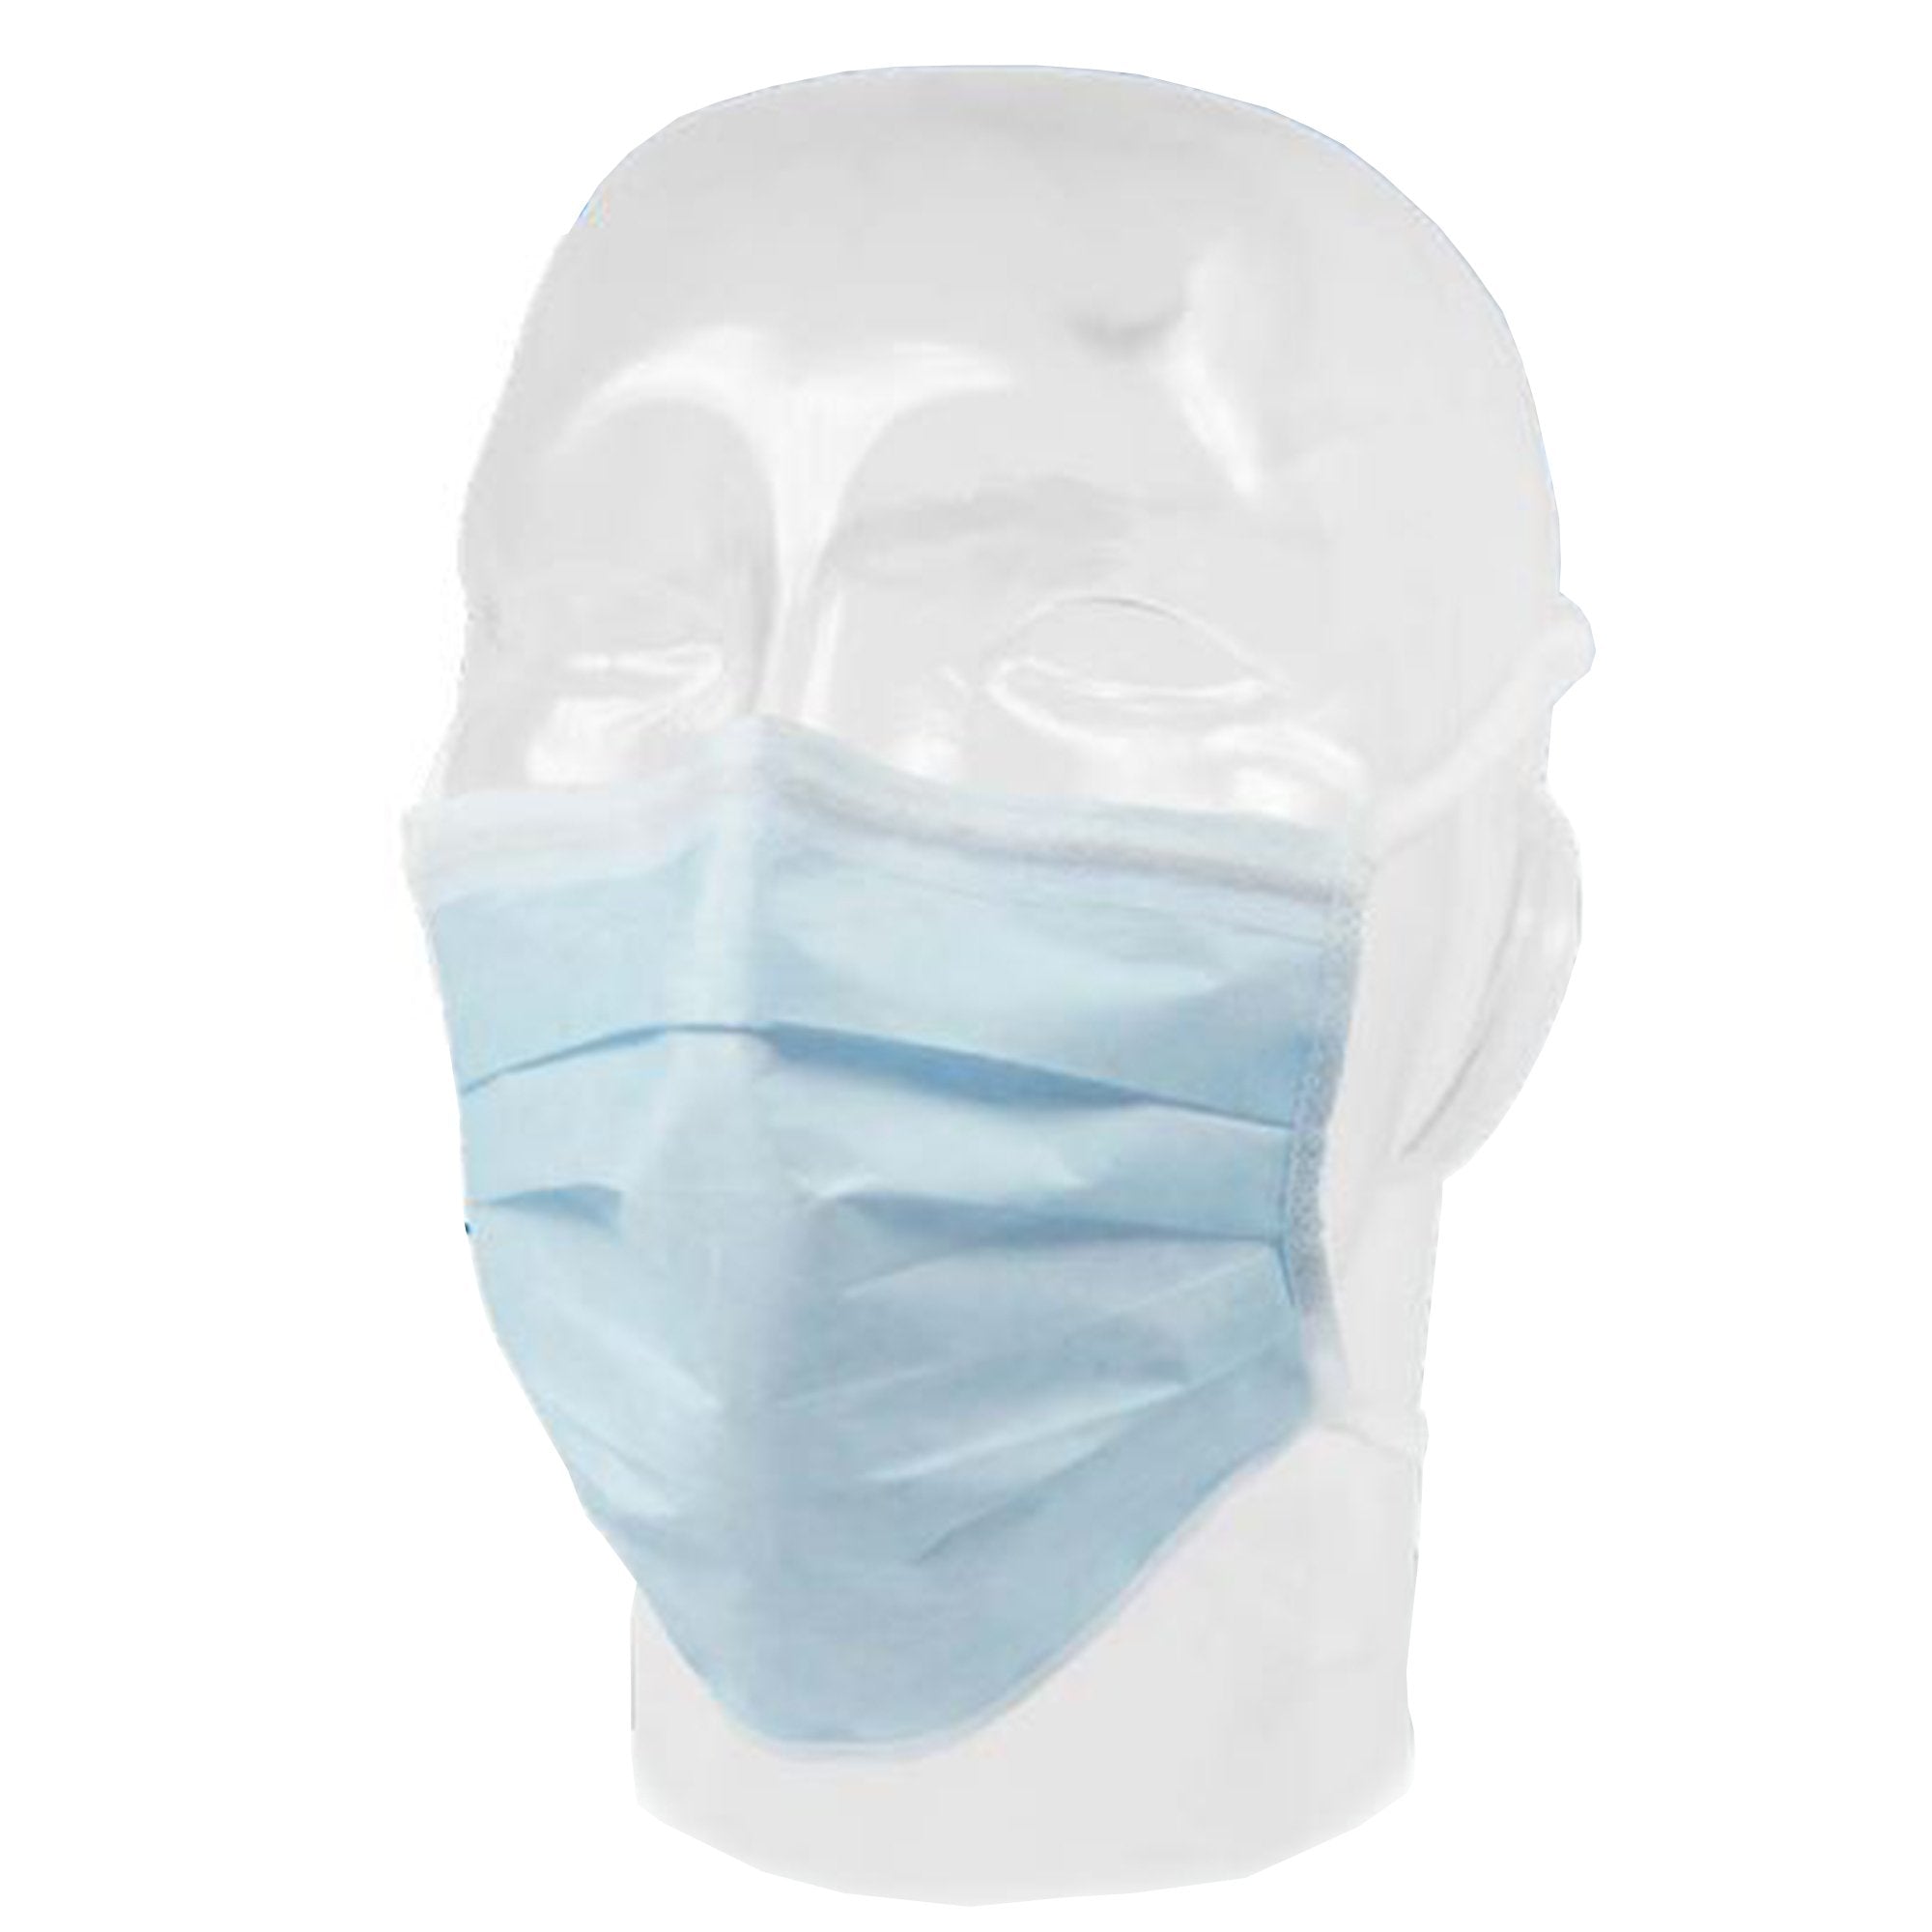 Surgical Mask Comfort-Plus Pleated Tie Closure One Size Fits Most Blue NonSterile Not Rated Adult